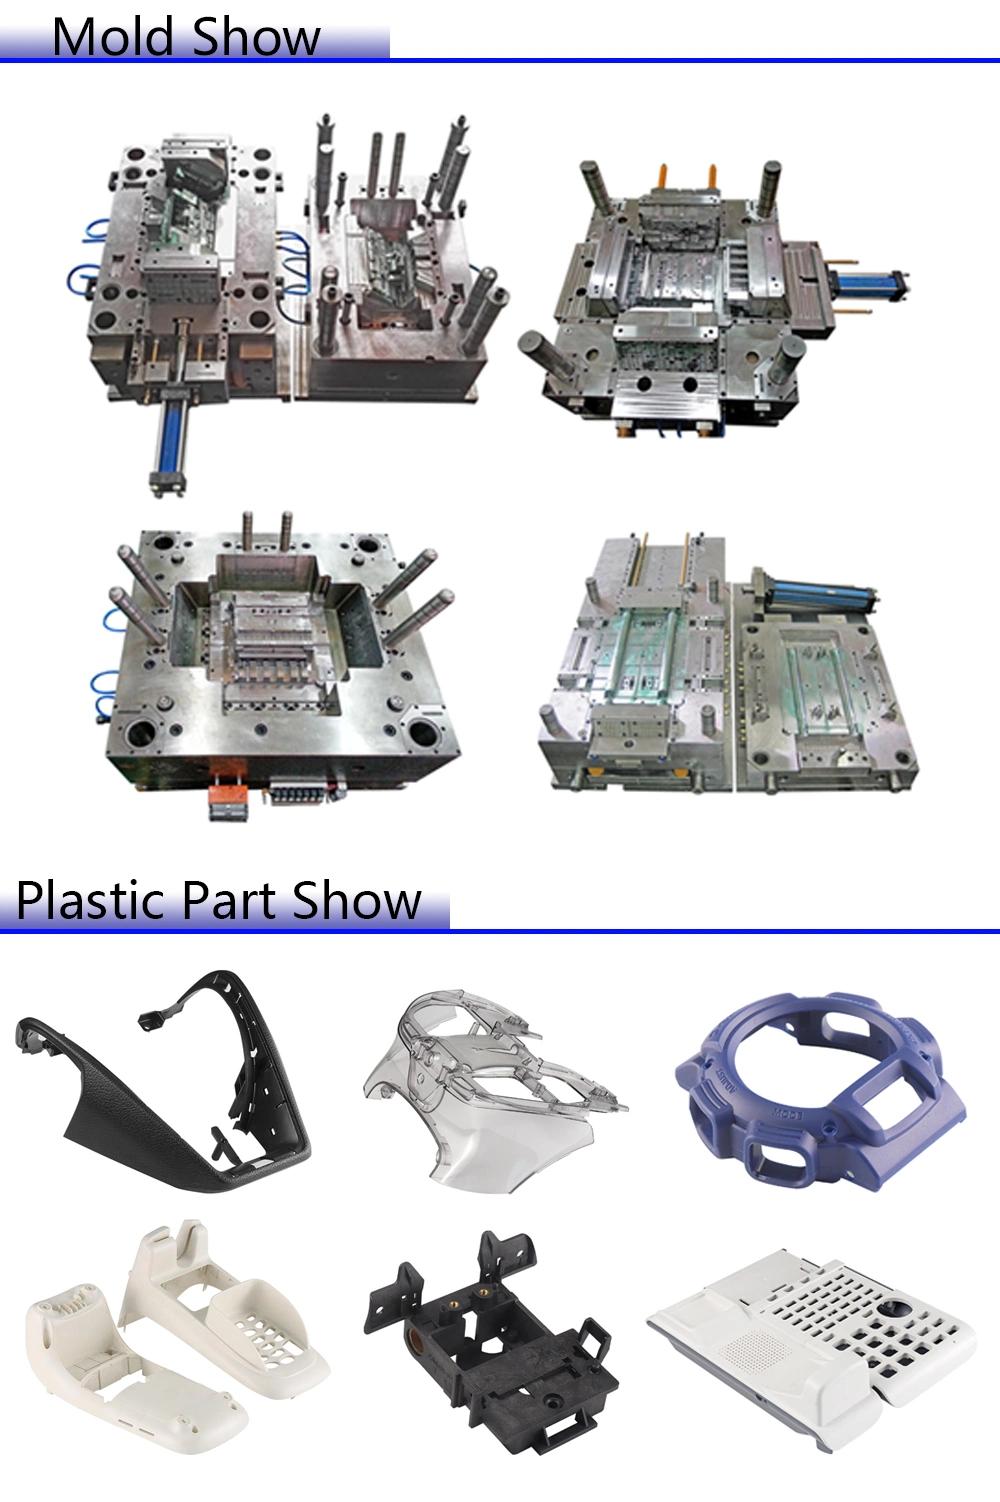 China Mobile Wireless Router Injection Molding Mold/Tooling